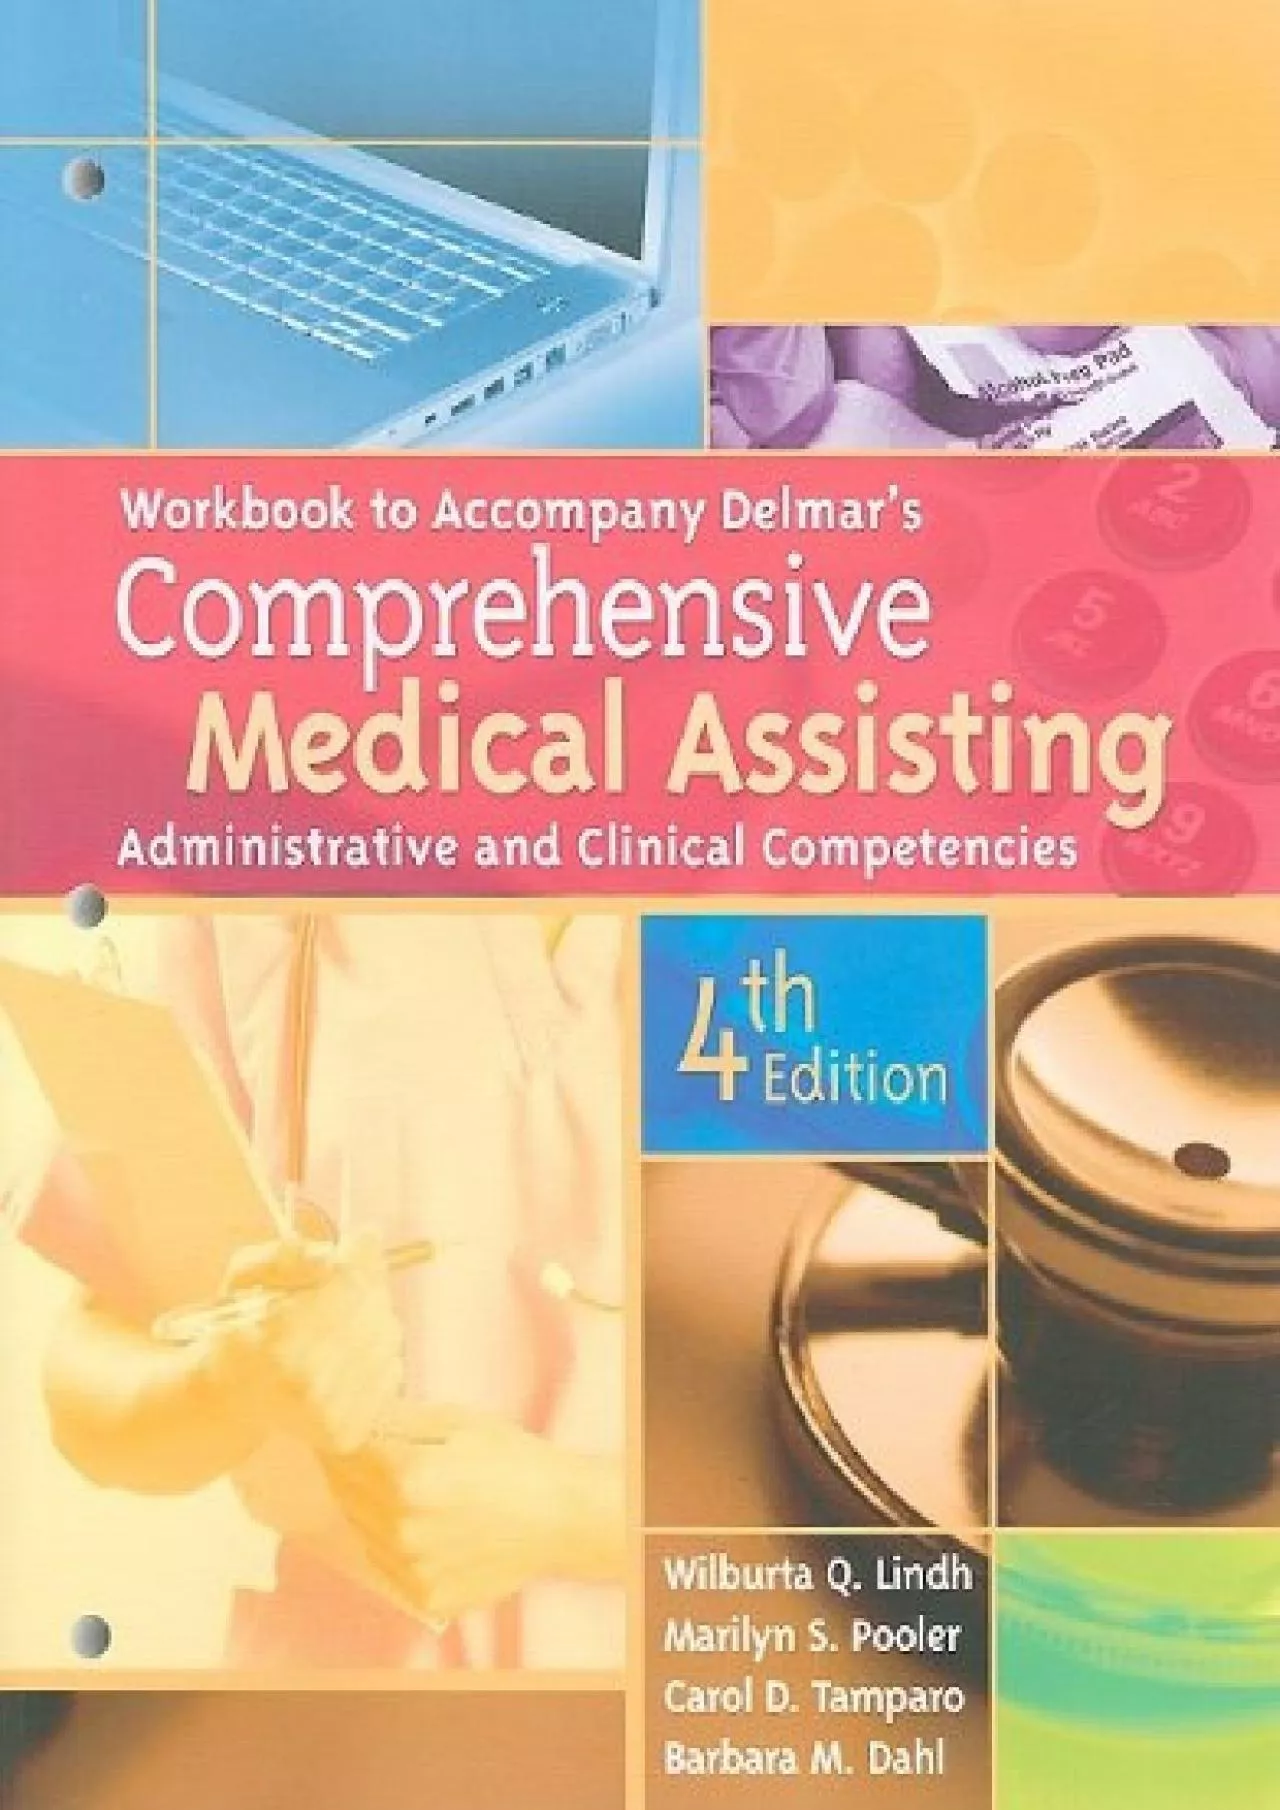 (BOOK)-Workbook for Delmar\'s Comprehensive Medical Assisting: Administrative and Clinical